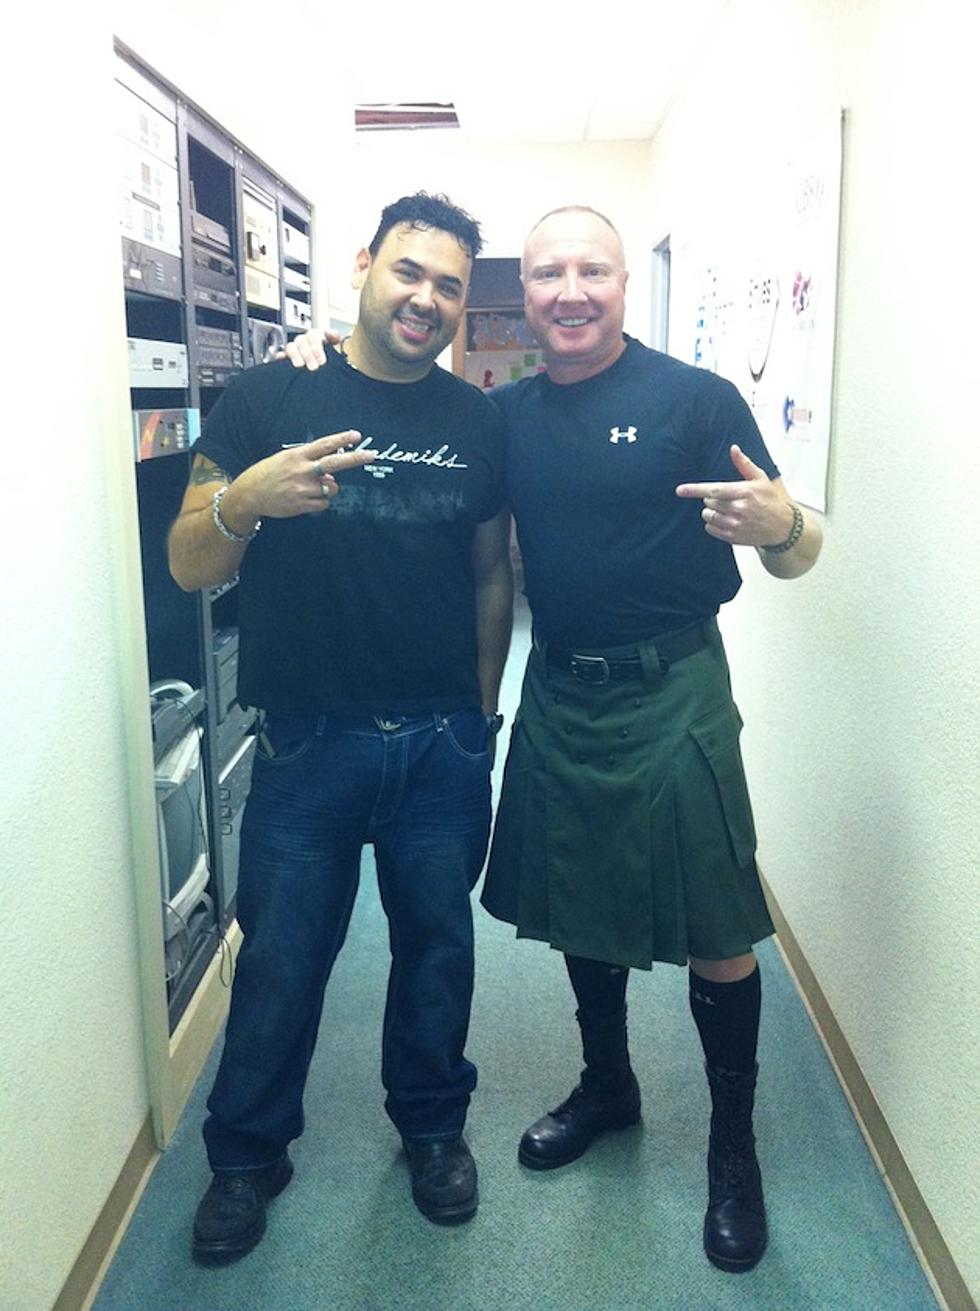 Designated Office &#8216;Fun Days&#8217; Are Good For Morale &#8211; Today Was Kilt Day